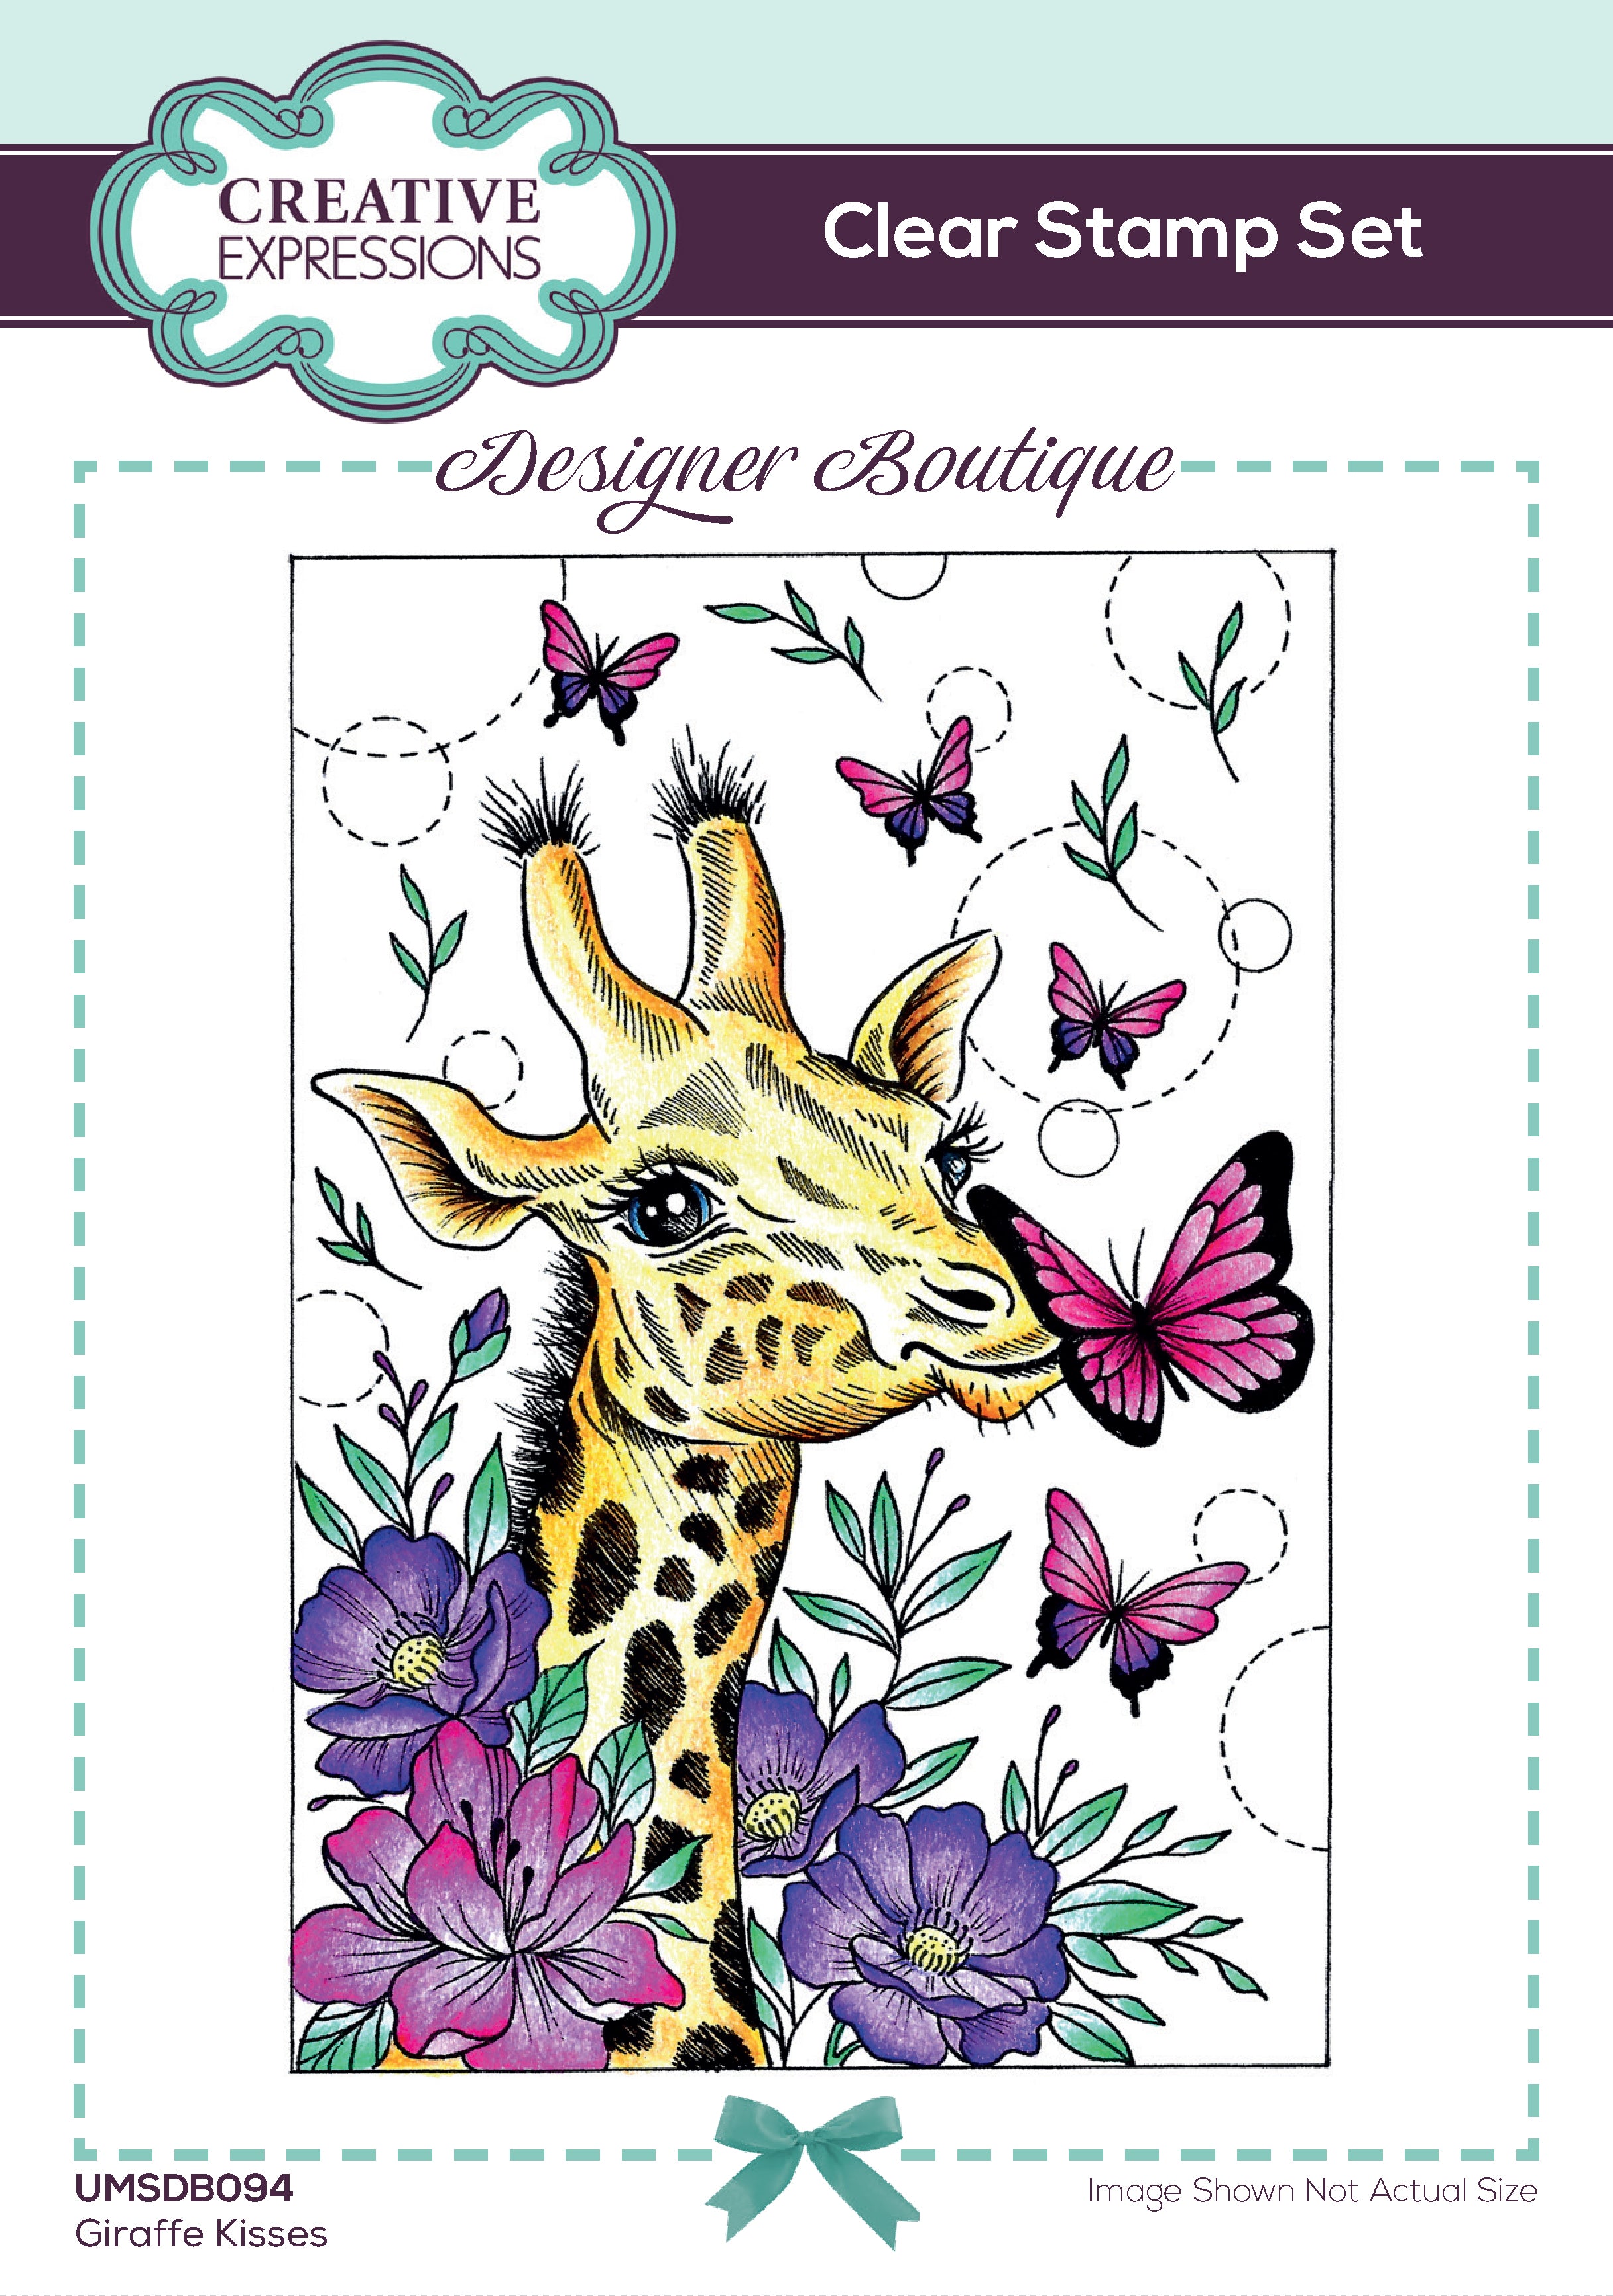 Creative Expressions Designer Boutique Giraffe Kisses 6 in x 4 in Clear Stamp Set